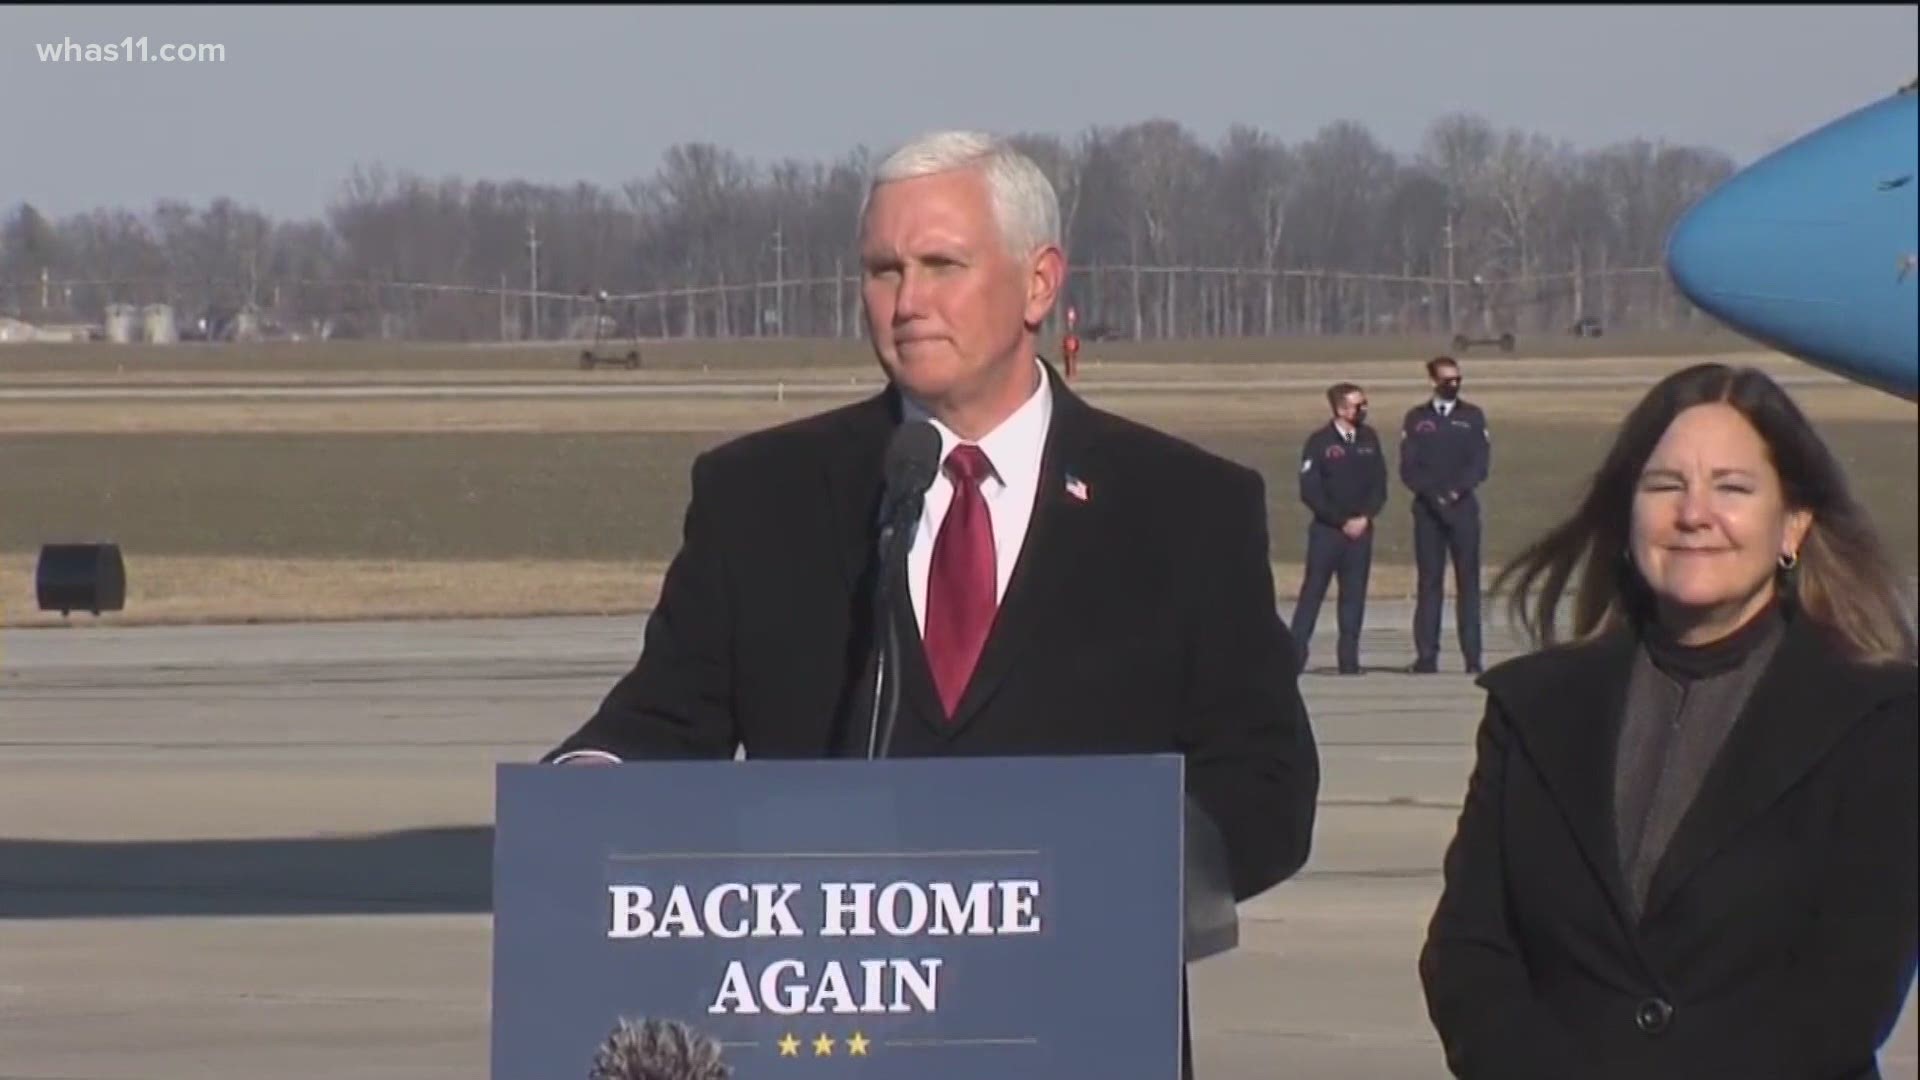 The former vice president announced he and his wife, Karen, will be moving back to Indiana in the summer.